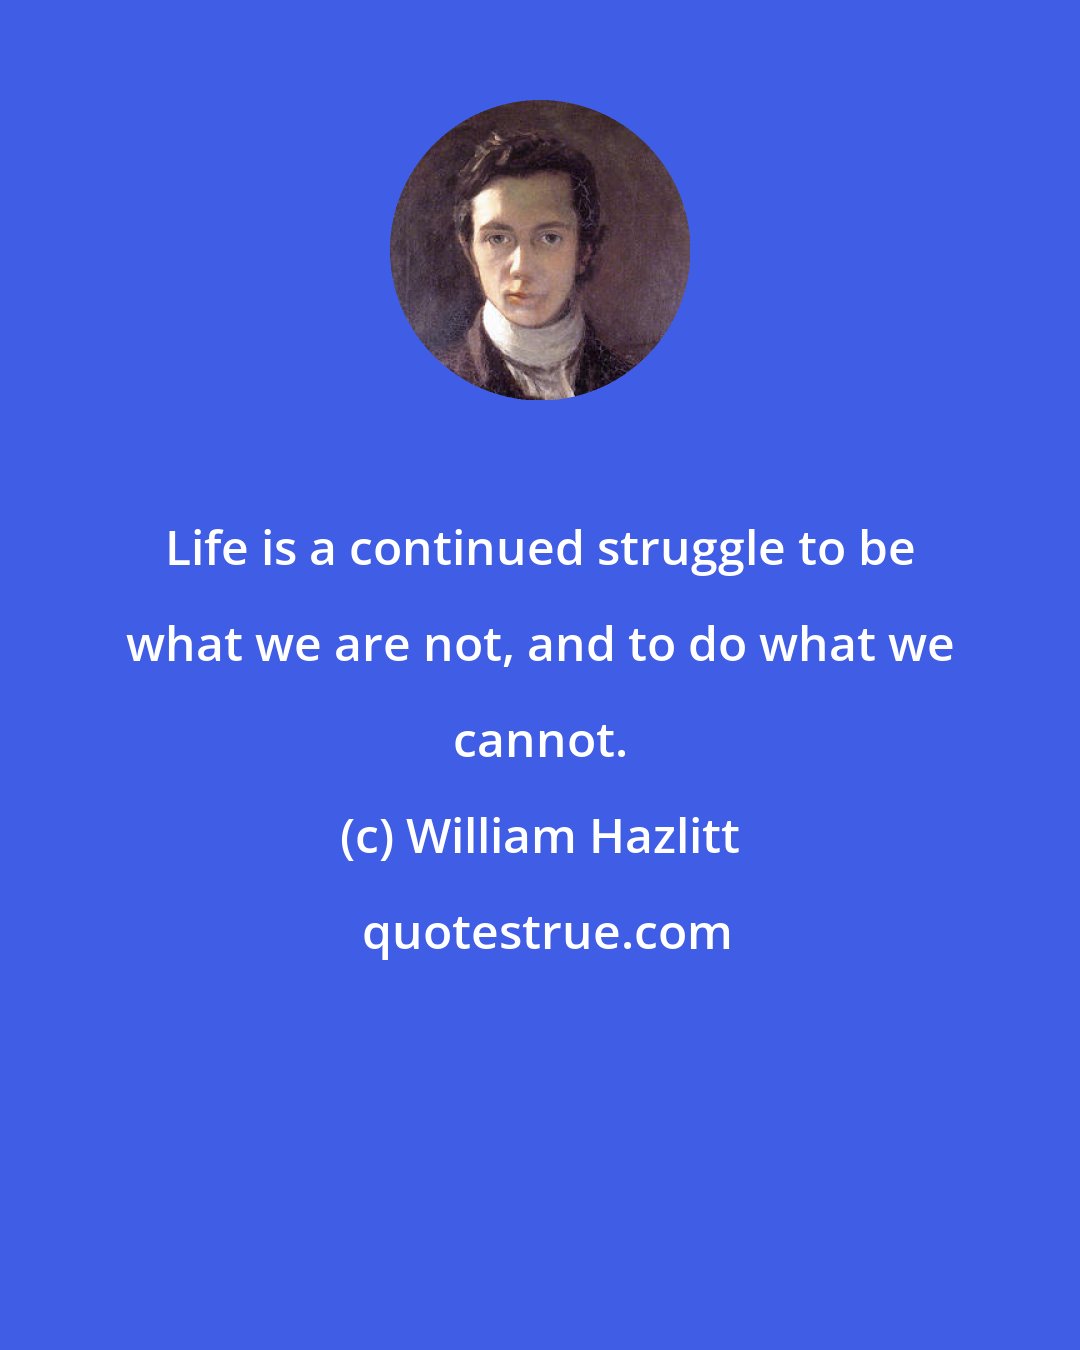 William Hazlitt: Life is a continued struggle to be what we are not, and to do what we cannot.